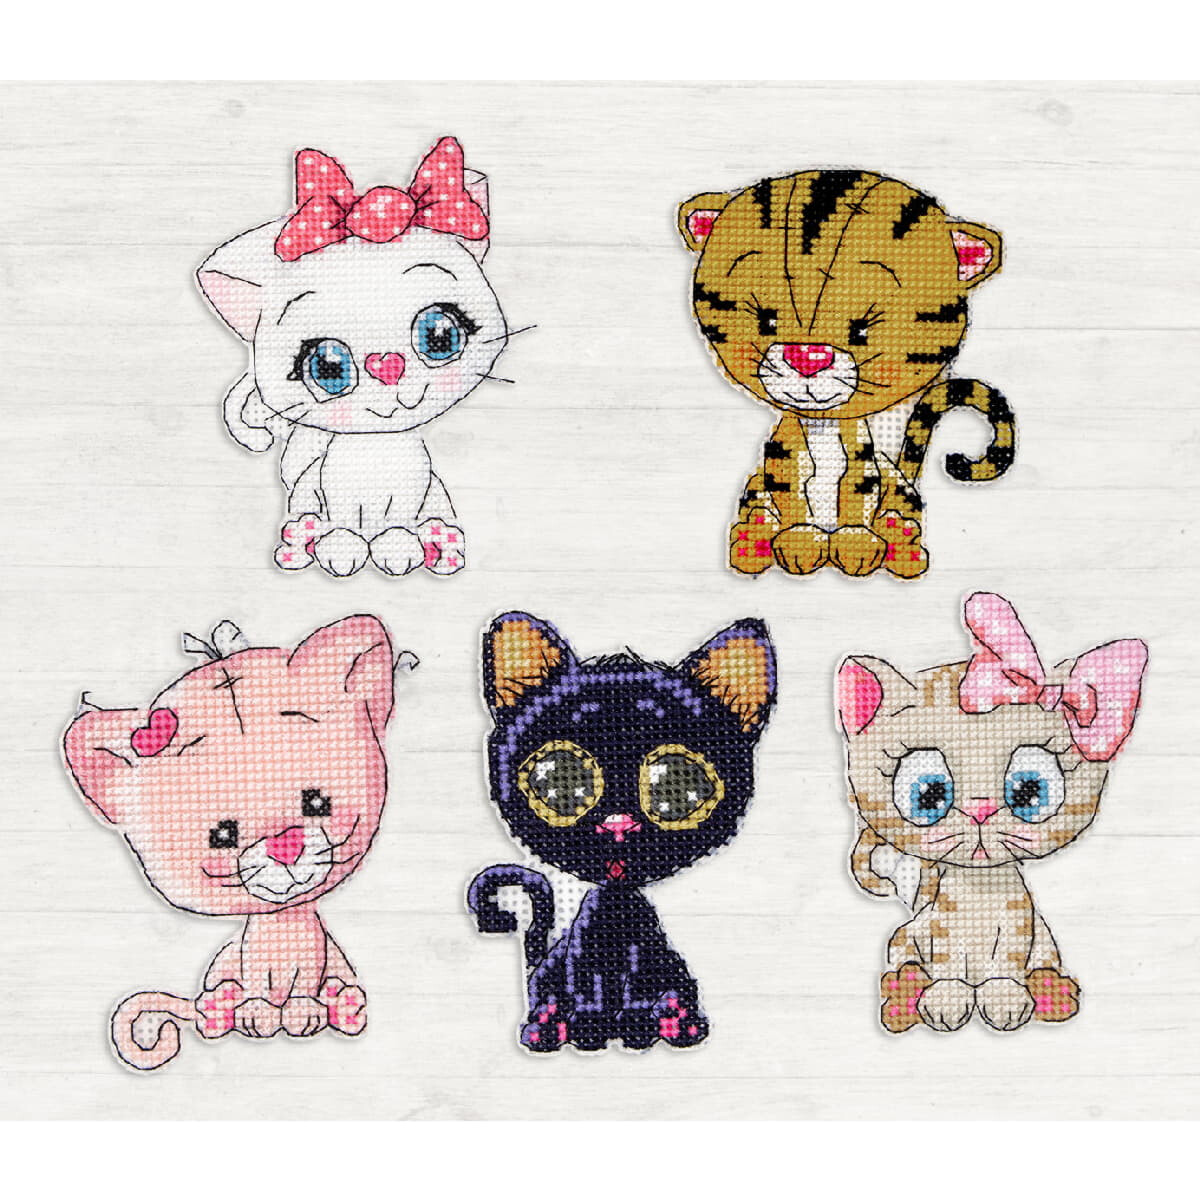 Five cross stitch patterns with cartoon kittens are...